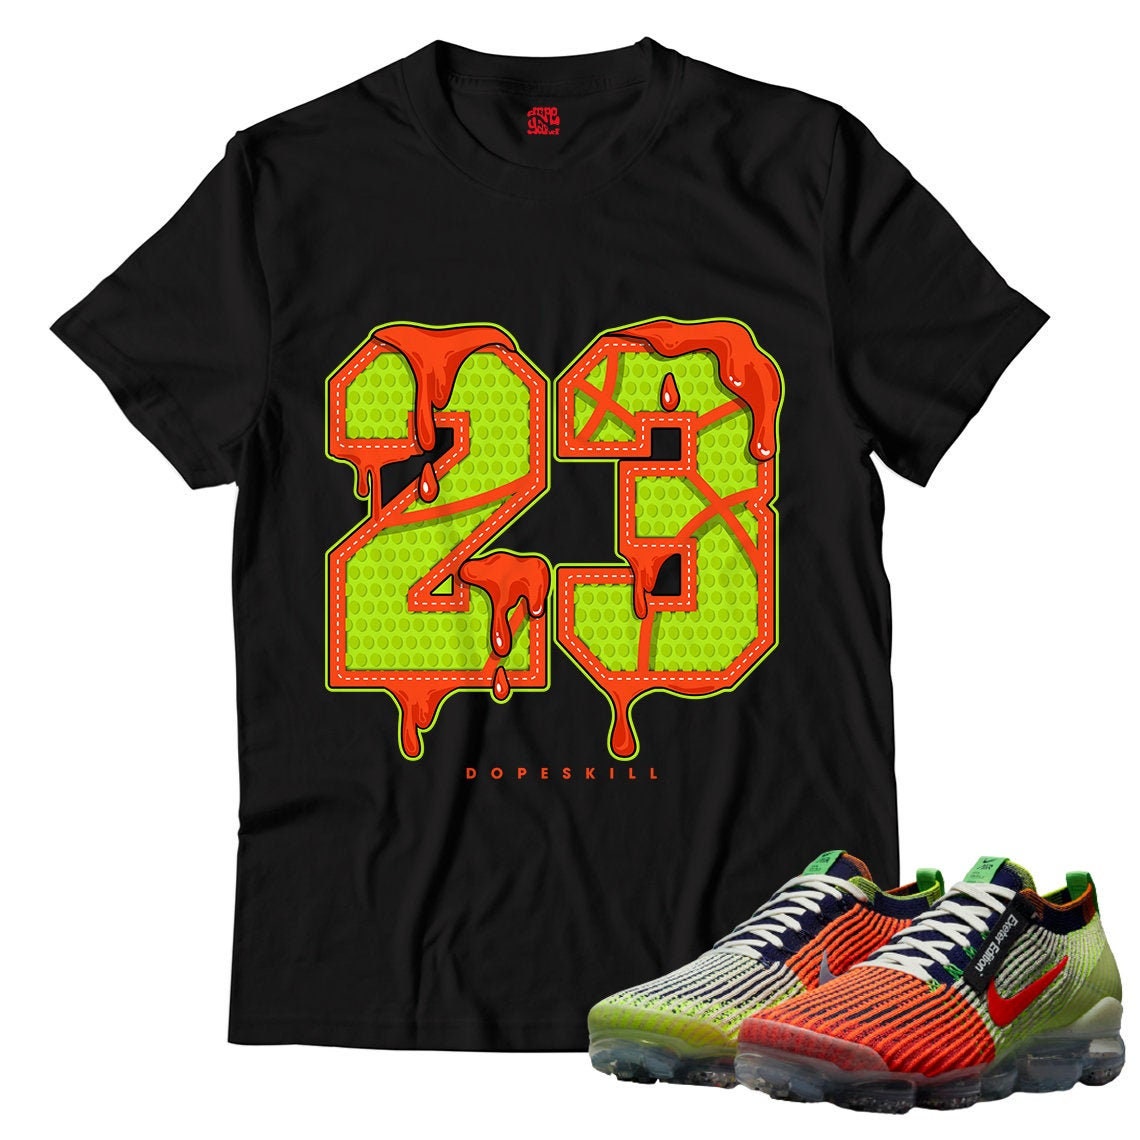 Number No.23 Unisex Shirt Match Nike Vapormax Flyknit 3 Exeter | Etsy